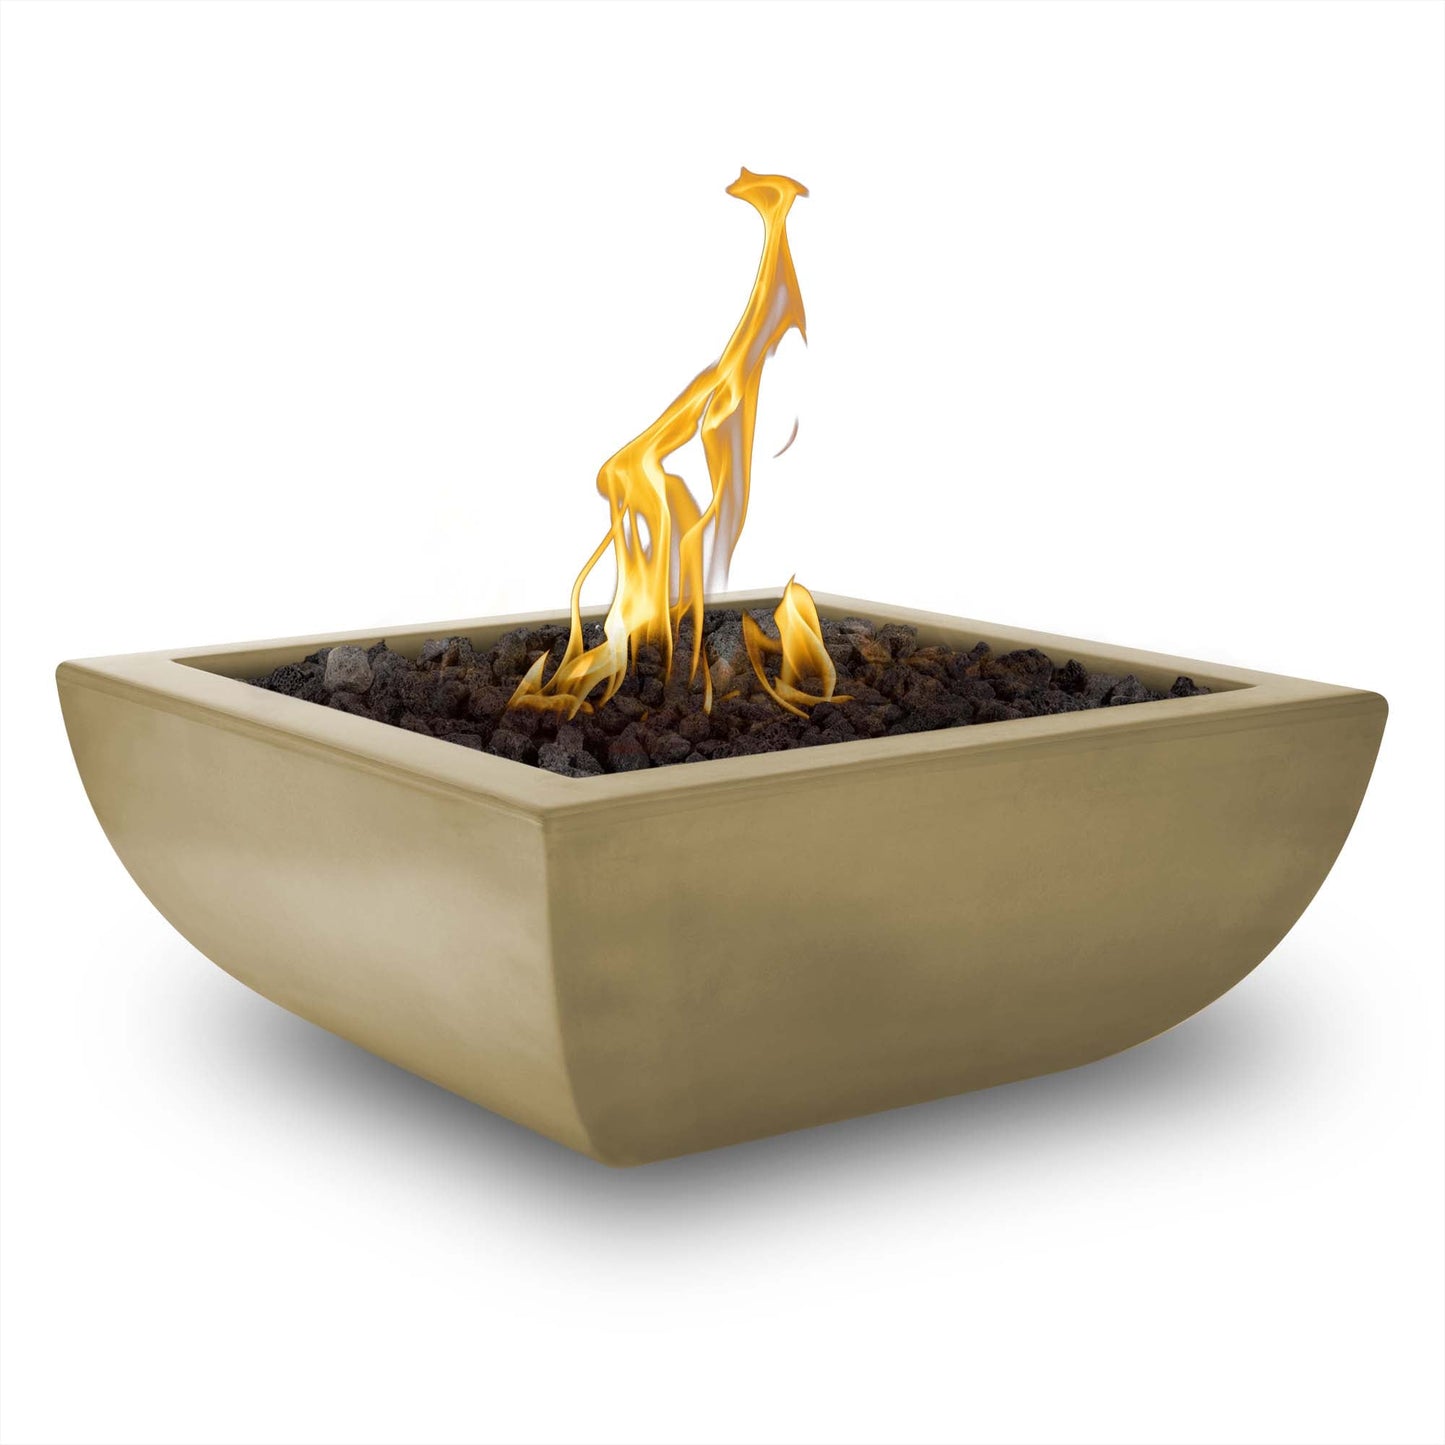 The Outdoor Plus Square Avalon 36" Natural Gray GFRC Concrete Natural Gas Fire Bowl with Match Lit with Flame Sense Ignition